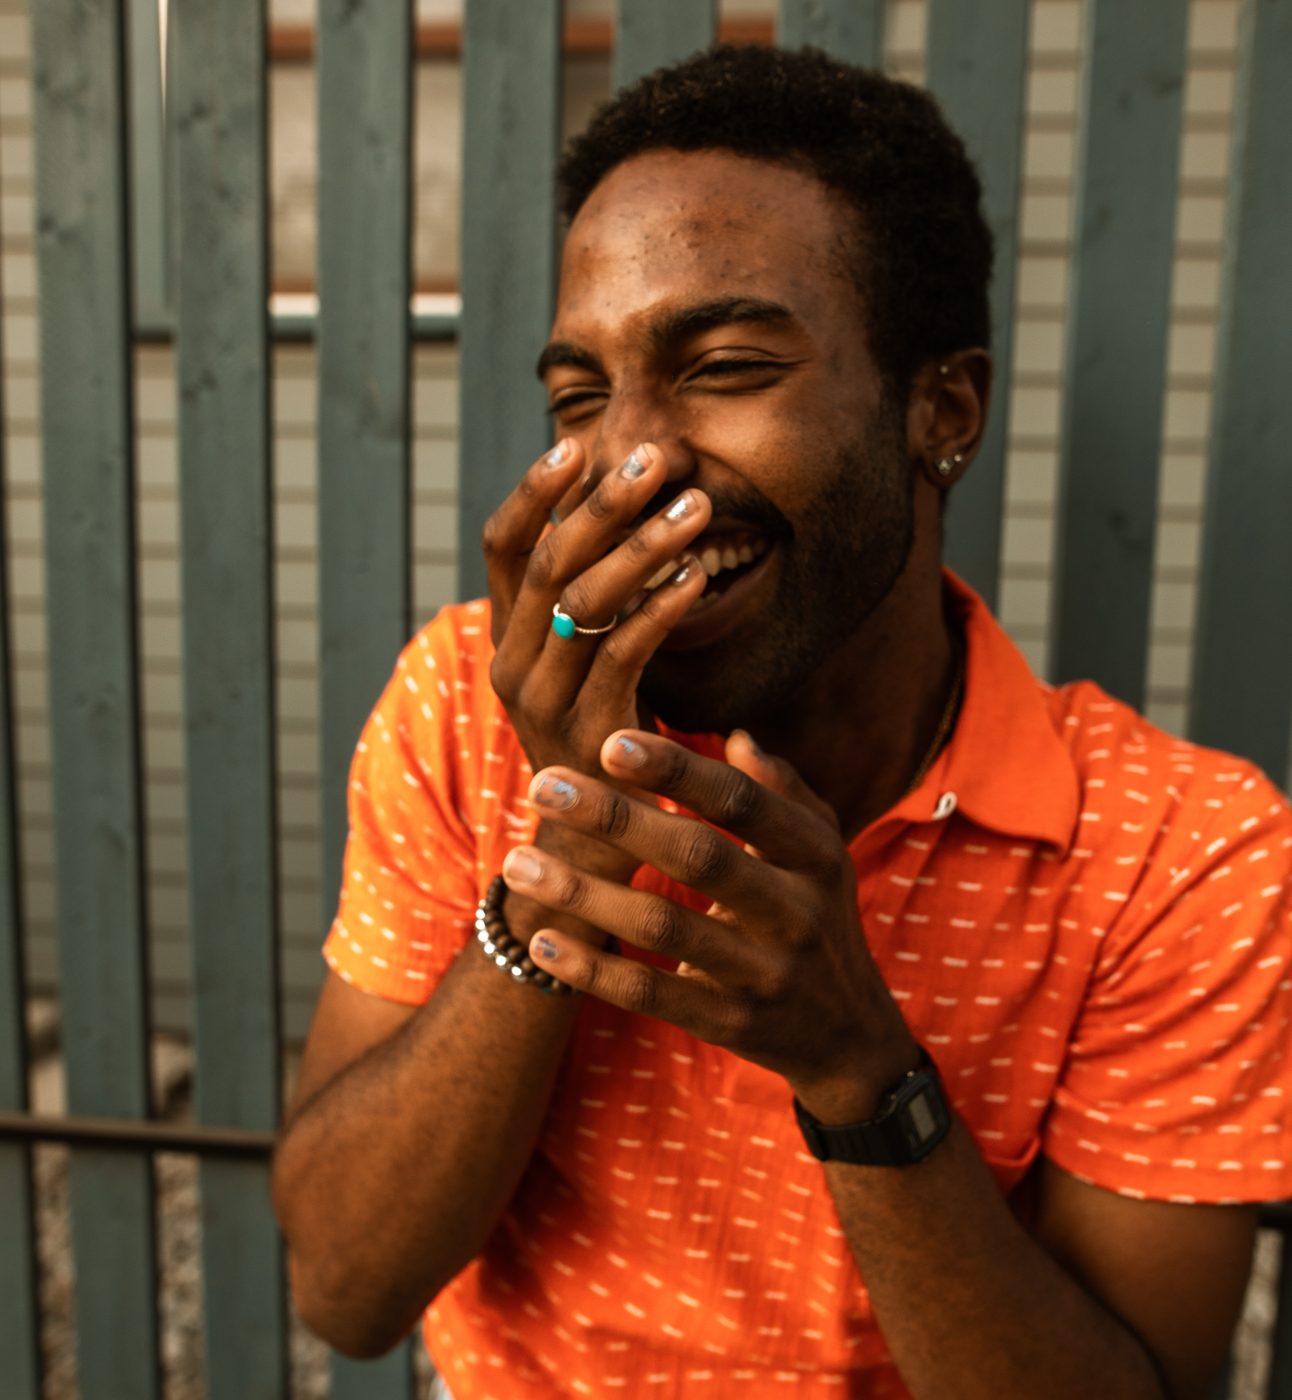 Man in Orange Shirt Laughing with Hands on Mouth